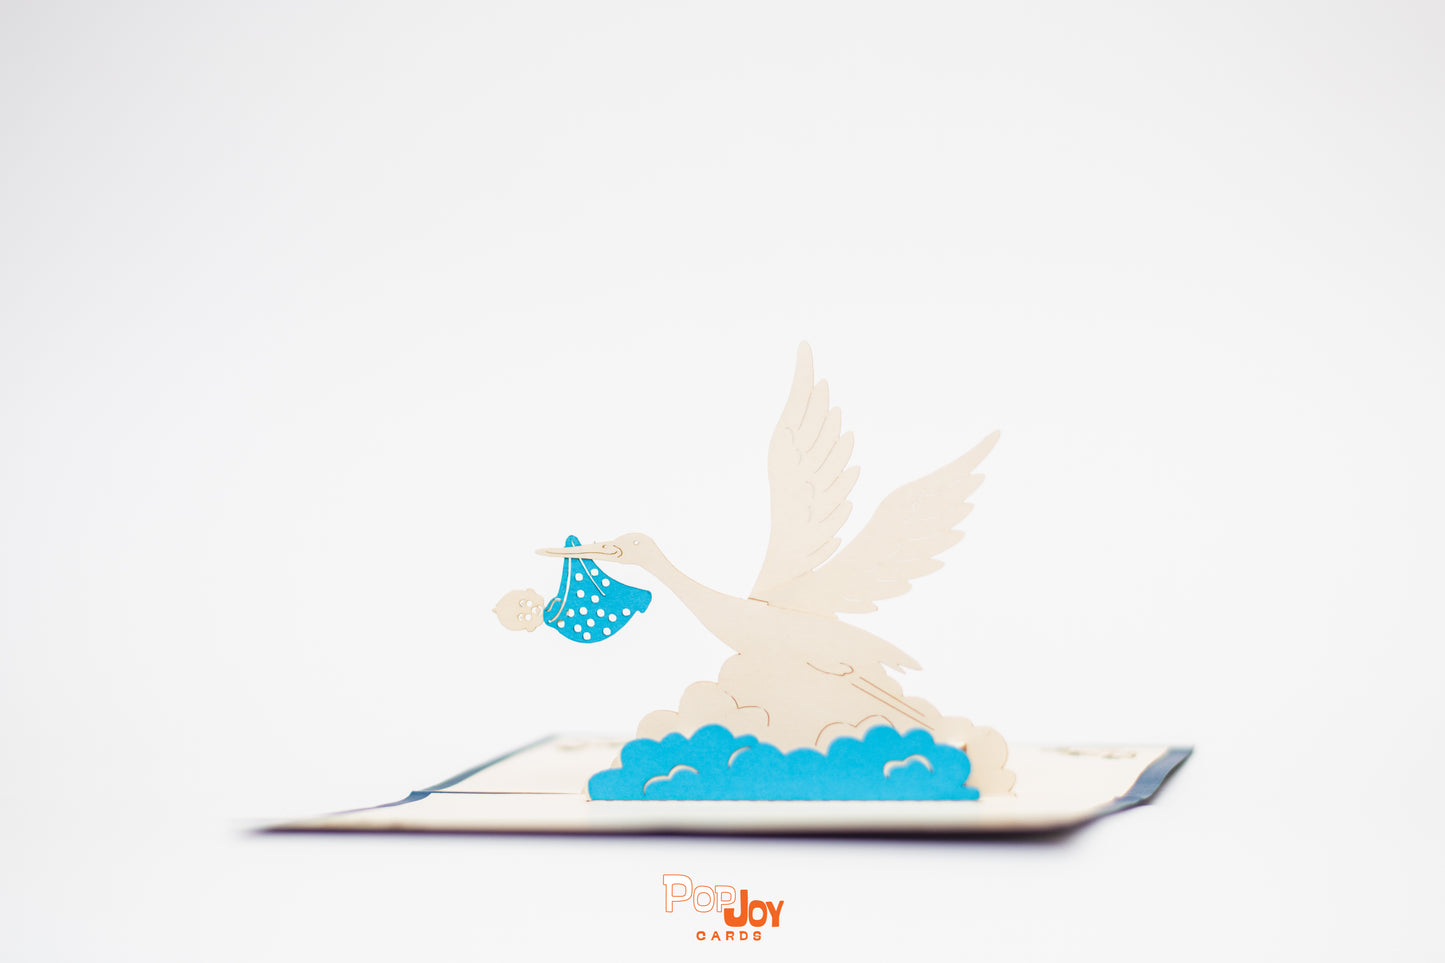 Pop-up card with white crane flying through blue and white clouds and carrying baby in blue polka dot cloth bundle